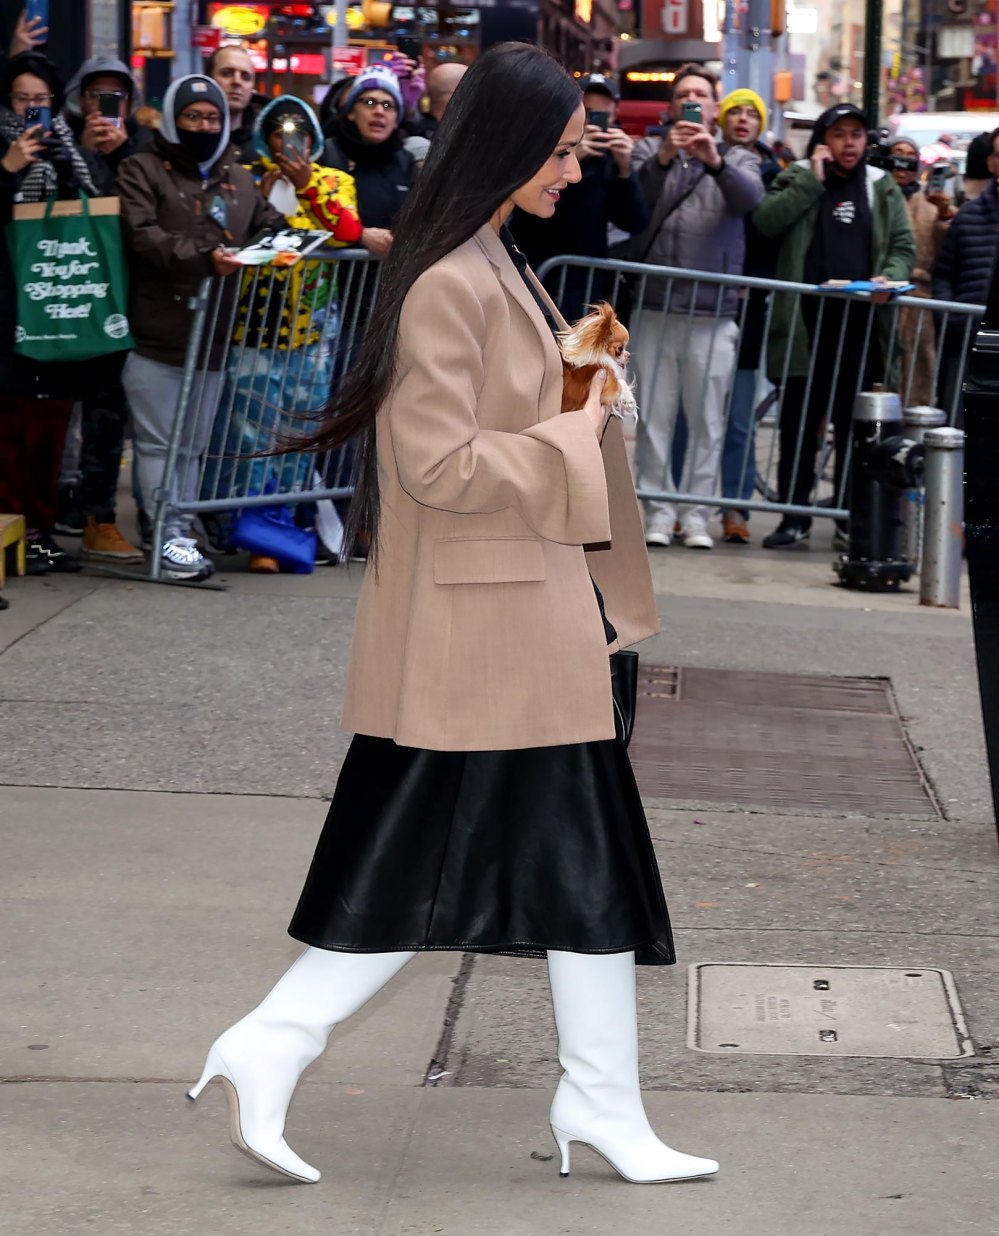 Demi Moore Continues Her Streak of Chic Monochromatic Winter Outfits in New York City